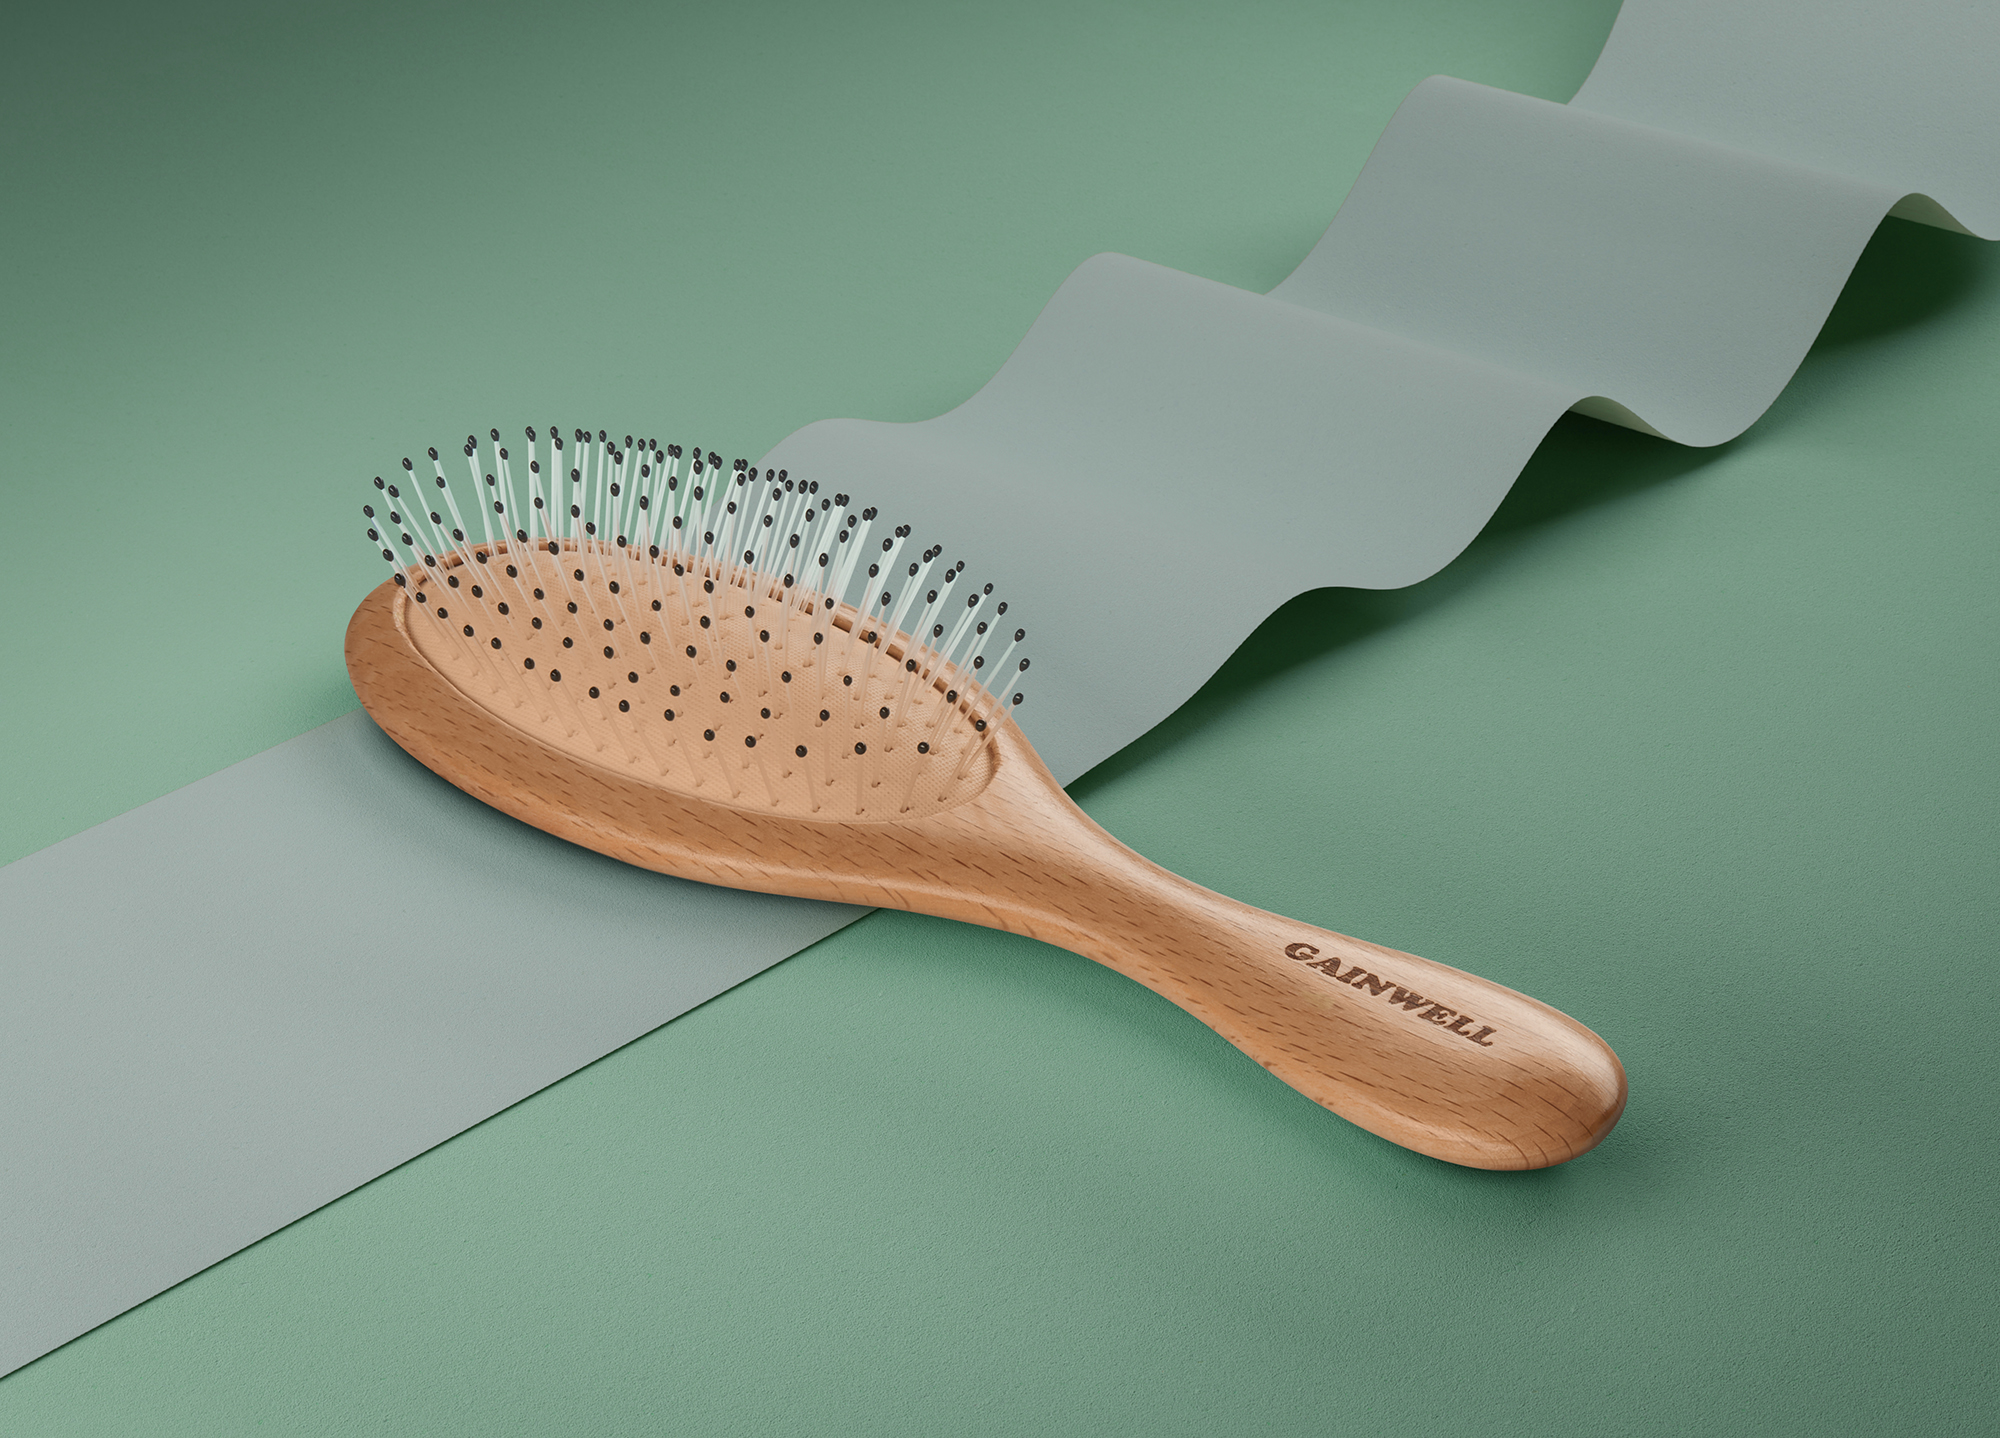 Hairbrush still life product image for website ecommerce use by Ian Knaggs